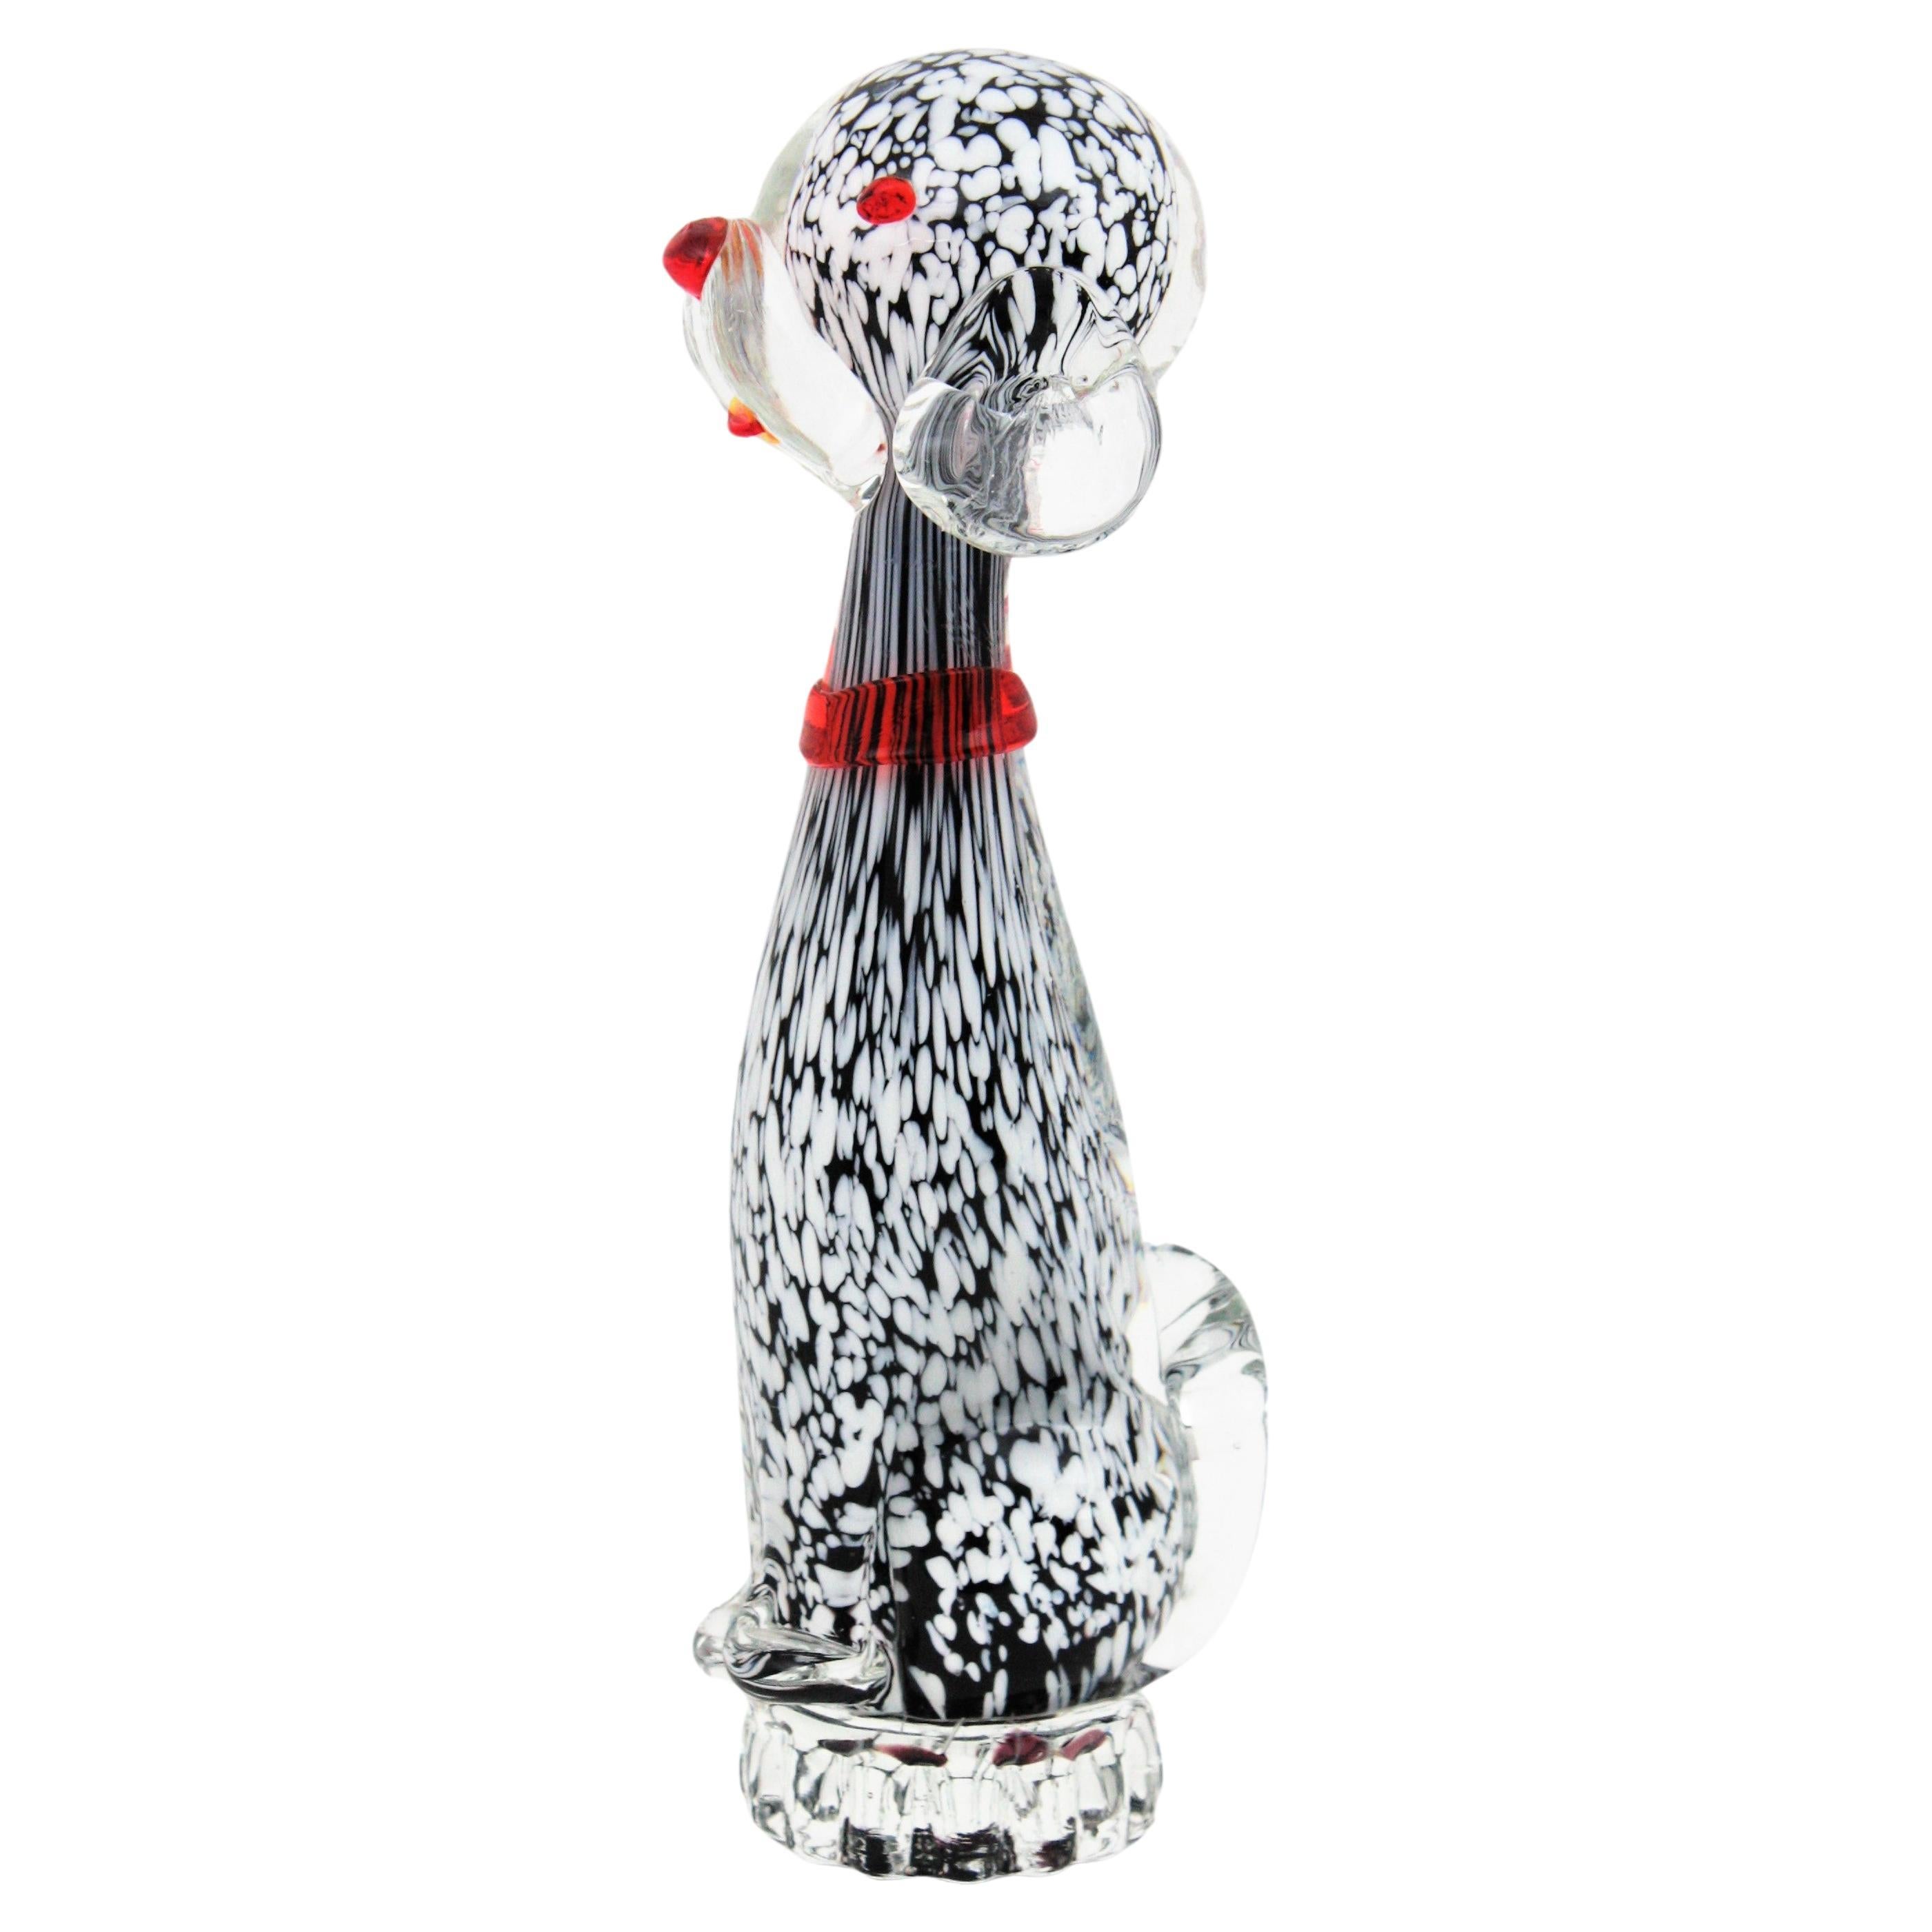 Dalmatian Murano Glass Black White Spotted Puppy Dog Figure Paperweight